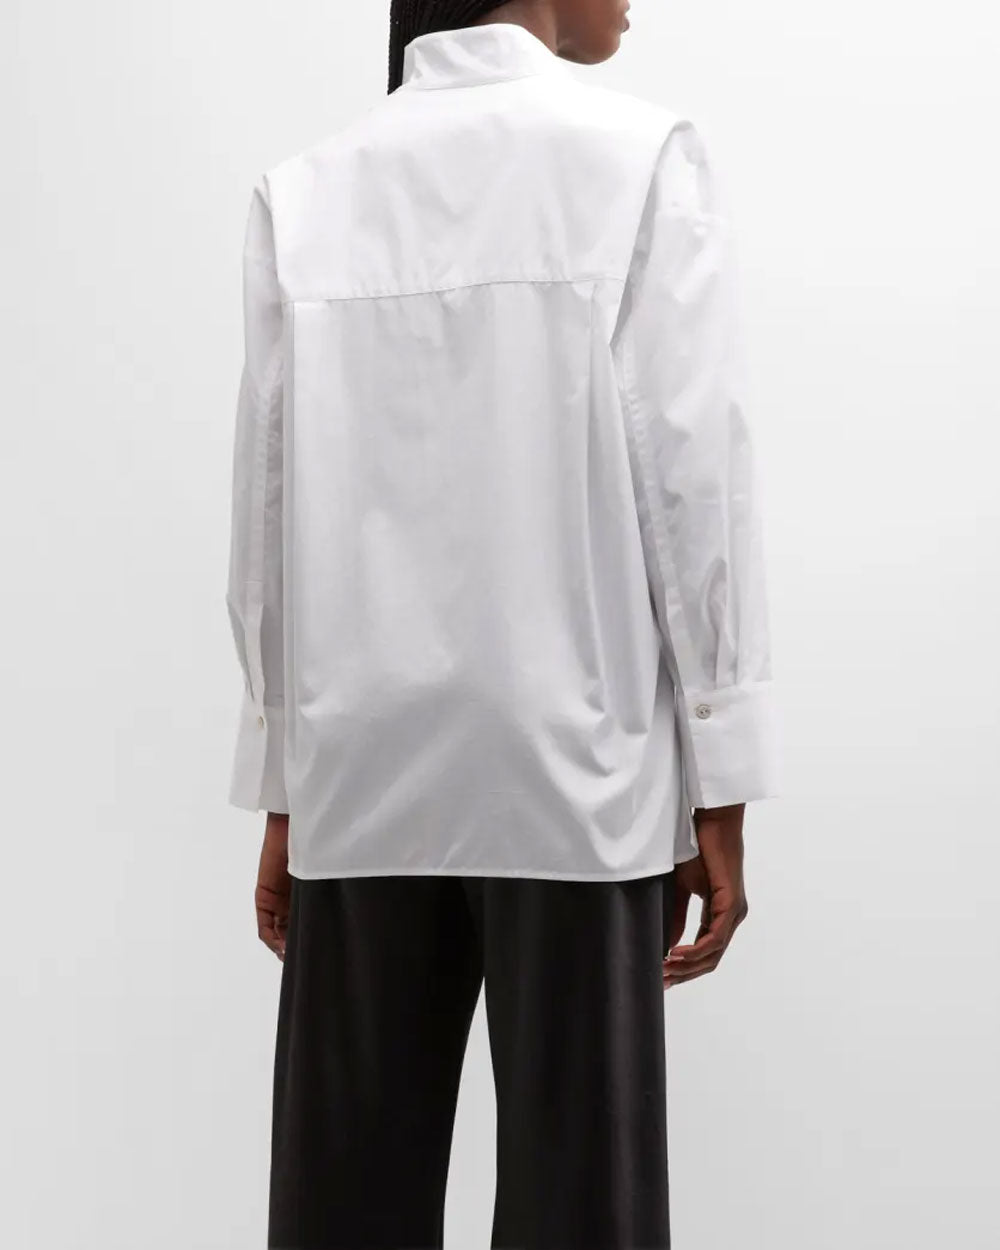 Off White Placket Stand Collar Shirt